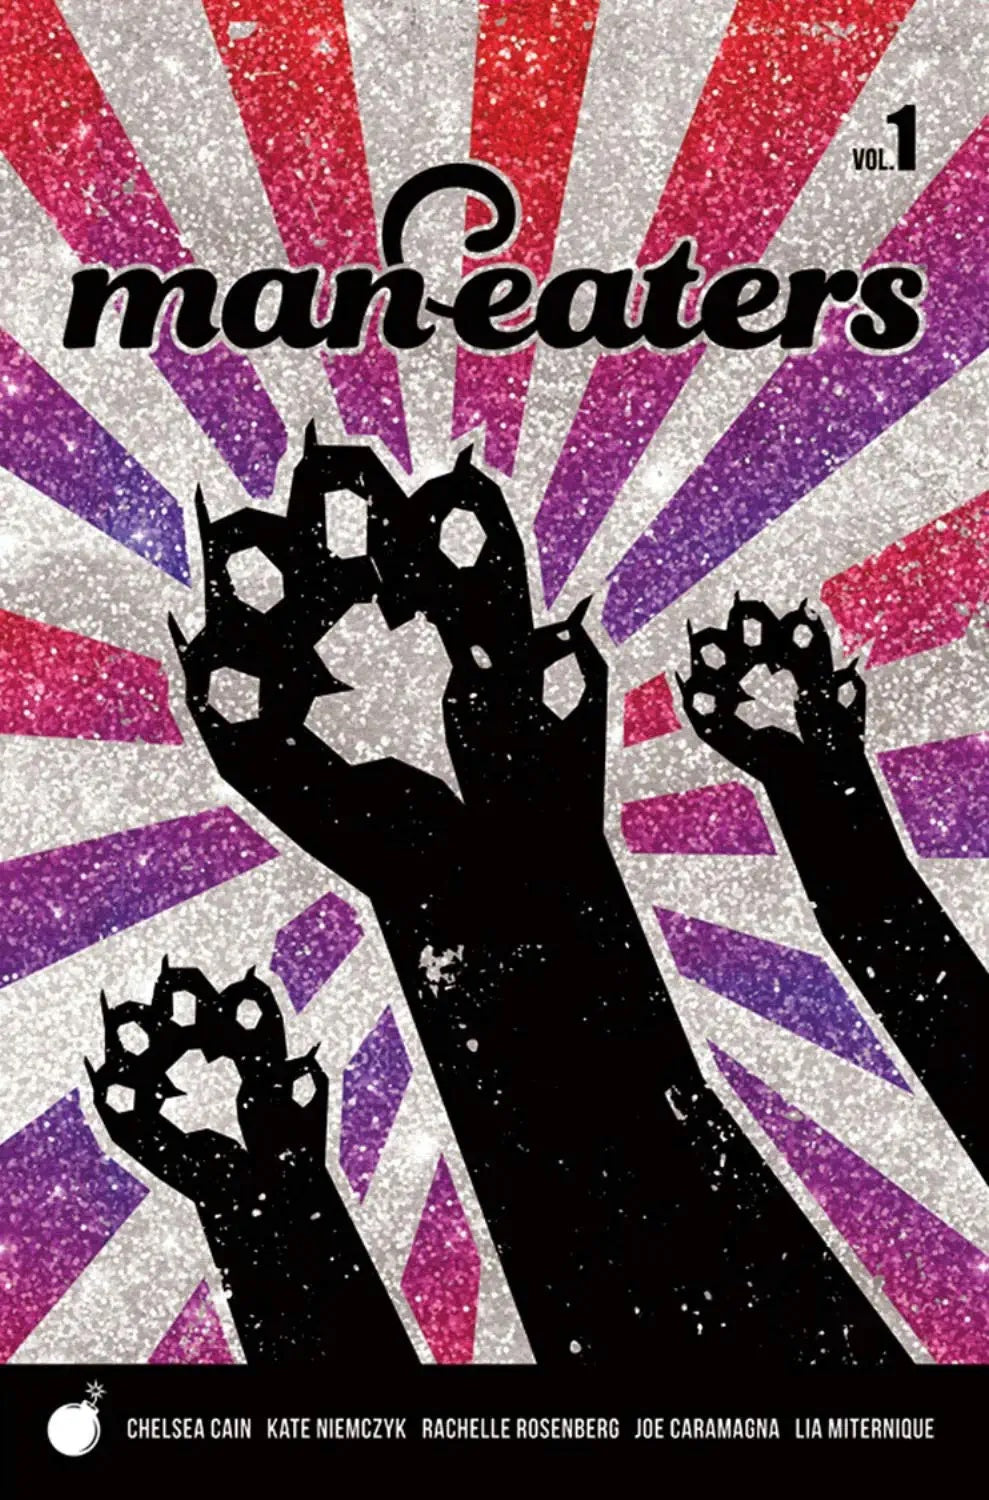 Man-Eaters: Volume 1 by Chelsea Cain